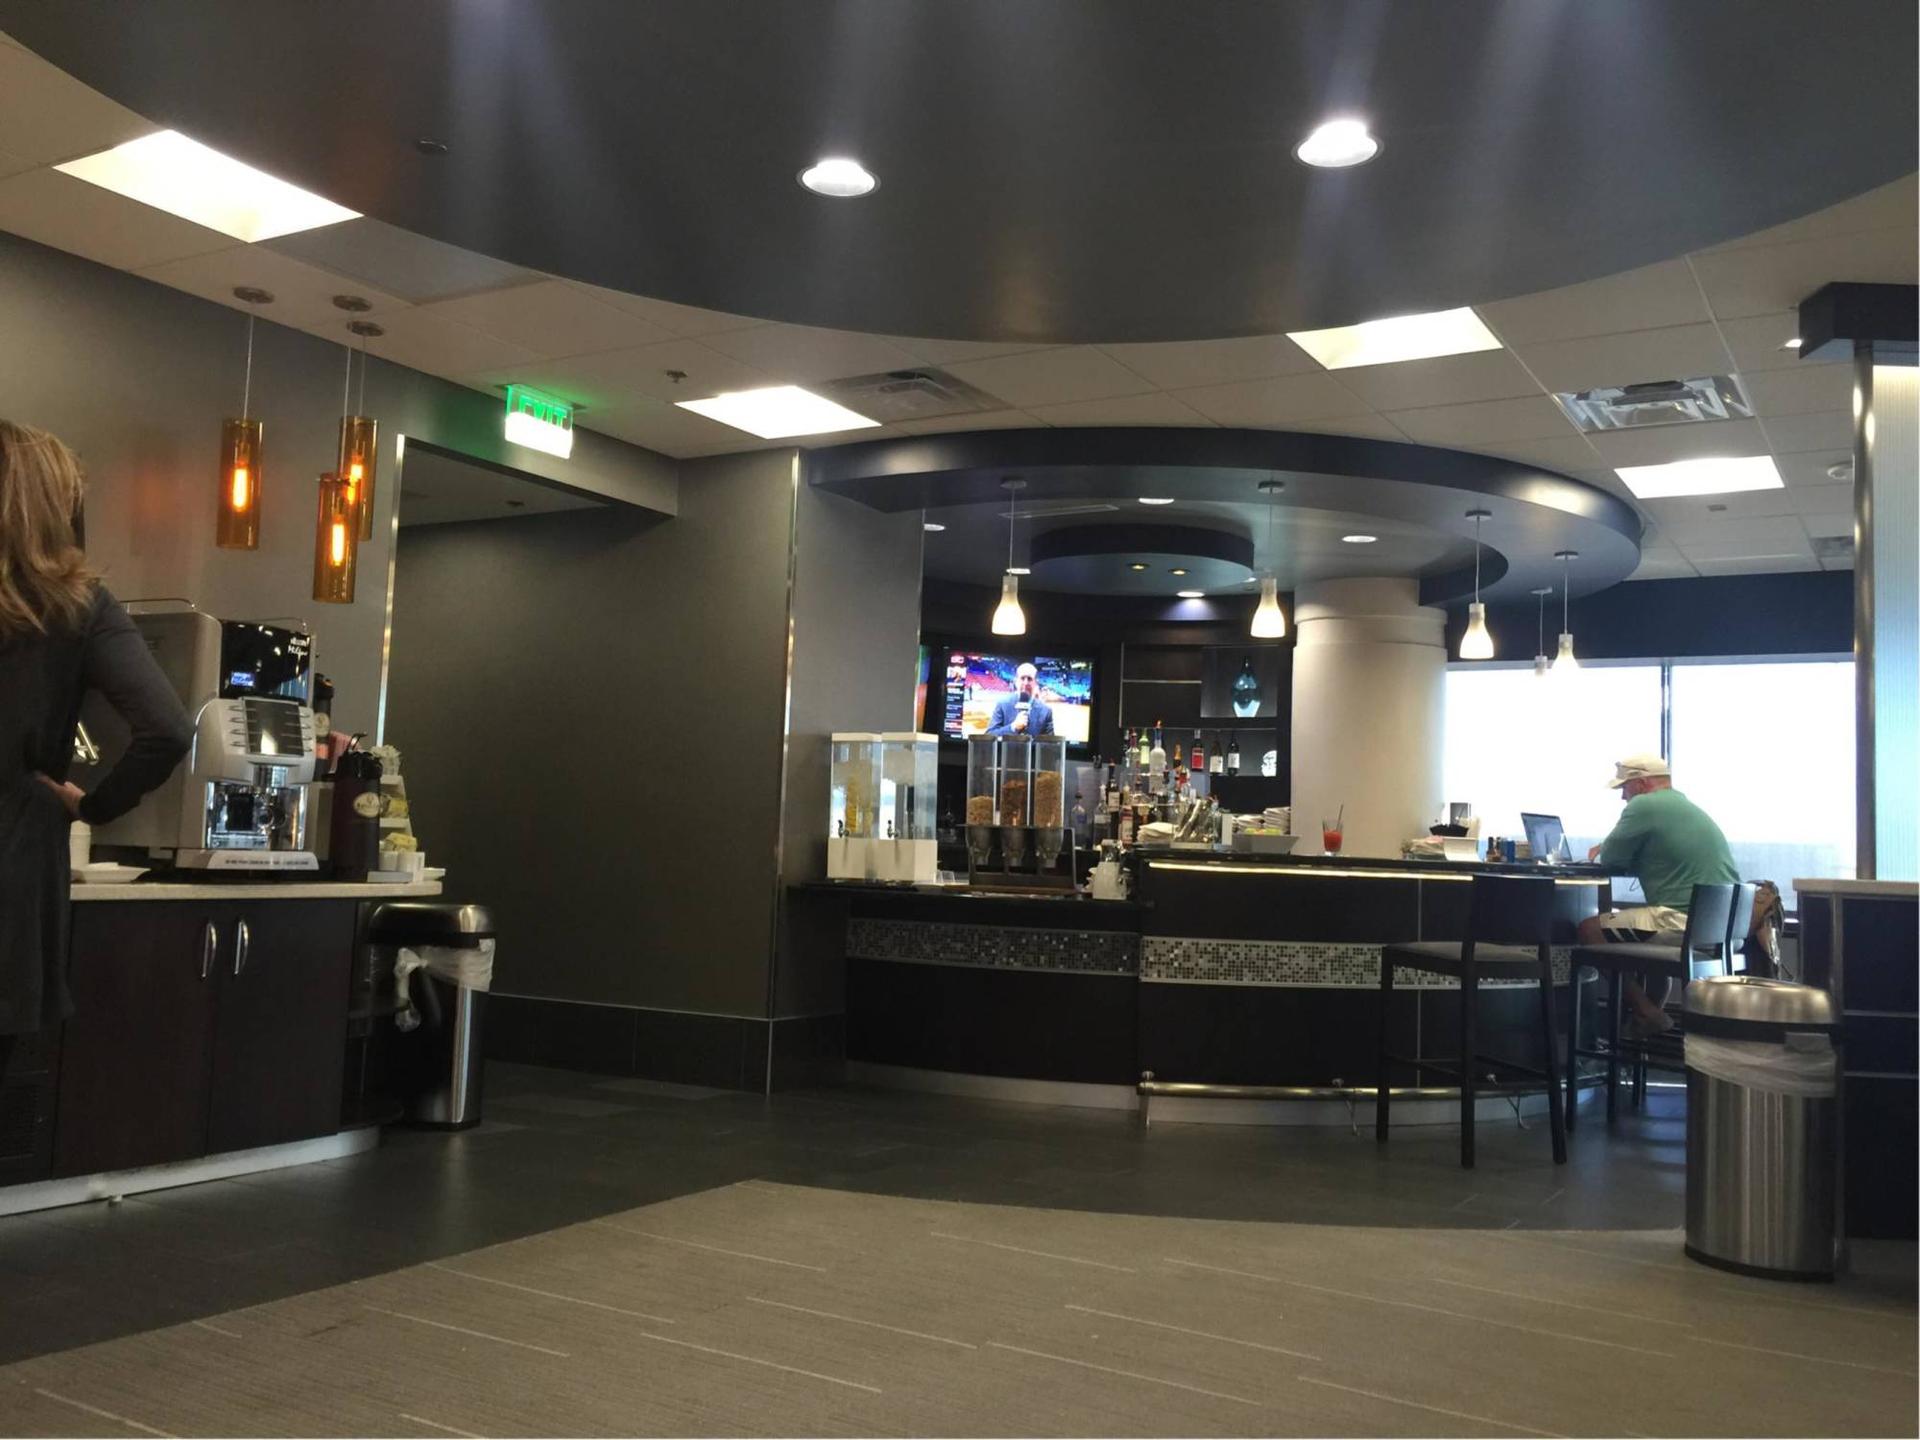 American Airlines Admirals Club image 9 of 12